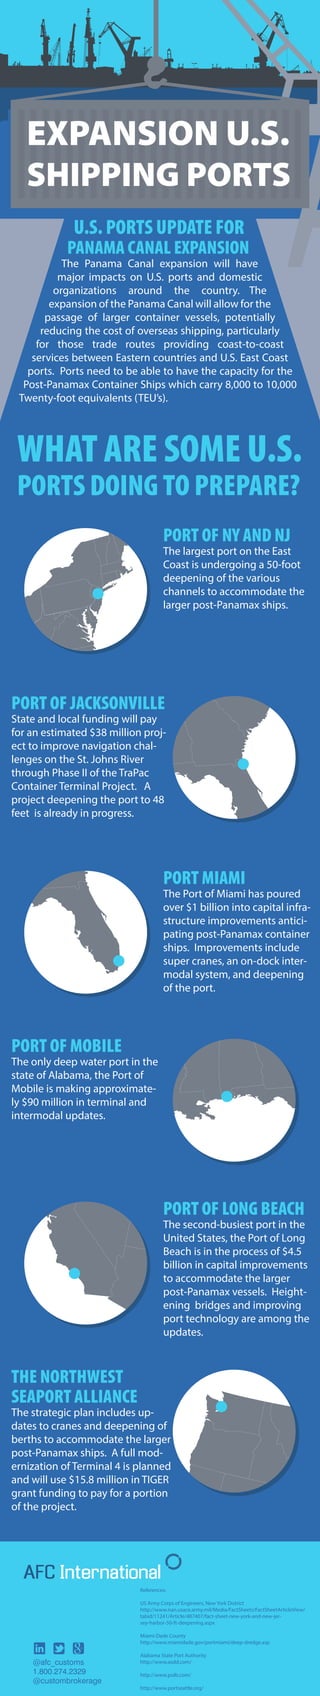 U.S. PORTS UPDATE FOR
PANAMA CANAL EXPANSION
The Panama Canal expansion will have
major impacts on U.S. ports and domestic
organizations around the country. The
expansion of the Panama Canal will allow for the
passage of larger container vessels, potentially
reducing the cost of overseas shipping, particularly
for those trade routes providing coast-to-coast
services between Eastern countries and U.S. East Coast
ports. Ports need to be able to have the capacity for the
Post-Panamax Container Ships which carry 8,000 to 10,000
Twenty-foot equivalents (TEU’s).
AFC International
@afc_customs
1.800.274.2329
@custombrokerage
References:
US Army Corps of Engineers, New York District
http://www.nan.usace.army.mil/Media/FactSheets/FactSheetArticleView/
tabid/11241/Article/487407/fact-sheet-new-york-and-new-jer-
sey-harbor-50-ft-deepening.aspx
Miami-Dade County
http://www.miamidade.gov/portmiami/deep-dredge.asp
Alabama State Port Authority
http://www.asdd.com/
http://www.polb.com/
http://www.portseattle.org/
PORT OF NY AND NJ
The largest port on the East
Coast is undergoing a 50-foot
deepening of the various
channels to accommodate the
larger post-Panamax ships.
WHAT ARE SOME U.S.
PORTS DOING TO PREPARE?
PORT OF JACKSONVILLE
State and local funding will pay
for an estimated $38 million proj-
ect to improve navigation chal-
lenges on the St. Johns River
through Phase II of the TraPac
Container Terminal Project. A
project deepening the port to 48
feet is already in progress.
PORT MIAMI
The Port of Miami has poured
over $1 billion into capital infra-
structure improvements antici-
pating post-Panamax container
ships. Improvements include
super cranes, an on-dock inter-
modal system, and deepening
of the port.
PORT OF MOBILE
The only deep water port in the
state of Alabama, the Port of
Mobile is making approximate-
ly $90 million in terminal and
intermodal updates.
PORT OF LONG BEACH
The second-busiest port in the
United States, the Port of Long
Beach is in the process of $4.5
billion in capital improvements
to accommodate the larger
post-Panamax vessels. Height-
ening bridges and improving
port technology are among the
updates.
THE NORTHWEST
SEAPORT ALLIANCE
The strategic plan includes up-
dates to cranes and deepening of
berths to accommodate the larger
post-Panamax ships. A full mod-
ernization of Terminal 4 is planned
and will use $15.8 million in TIGER
grant funding to pay for a portion
of the project.
 